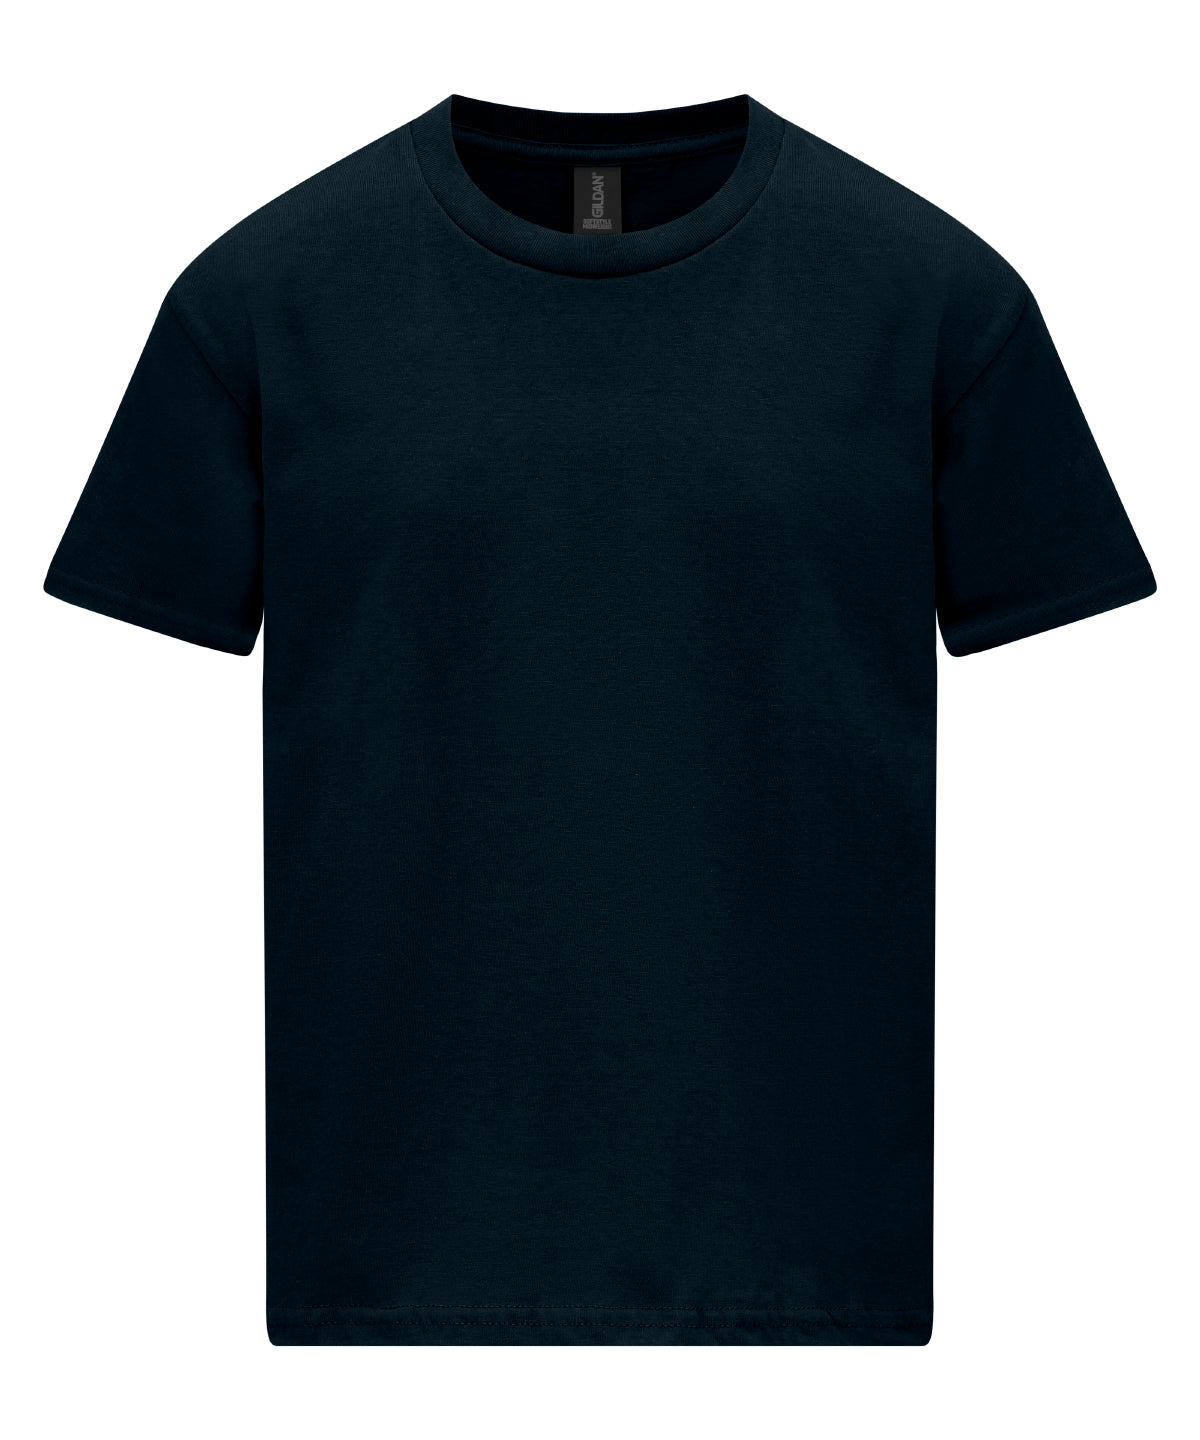 Softstyle midweight youth t-shirt | Pitch Black